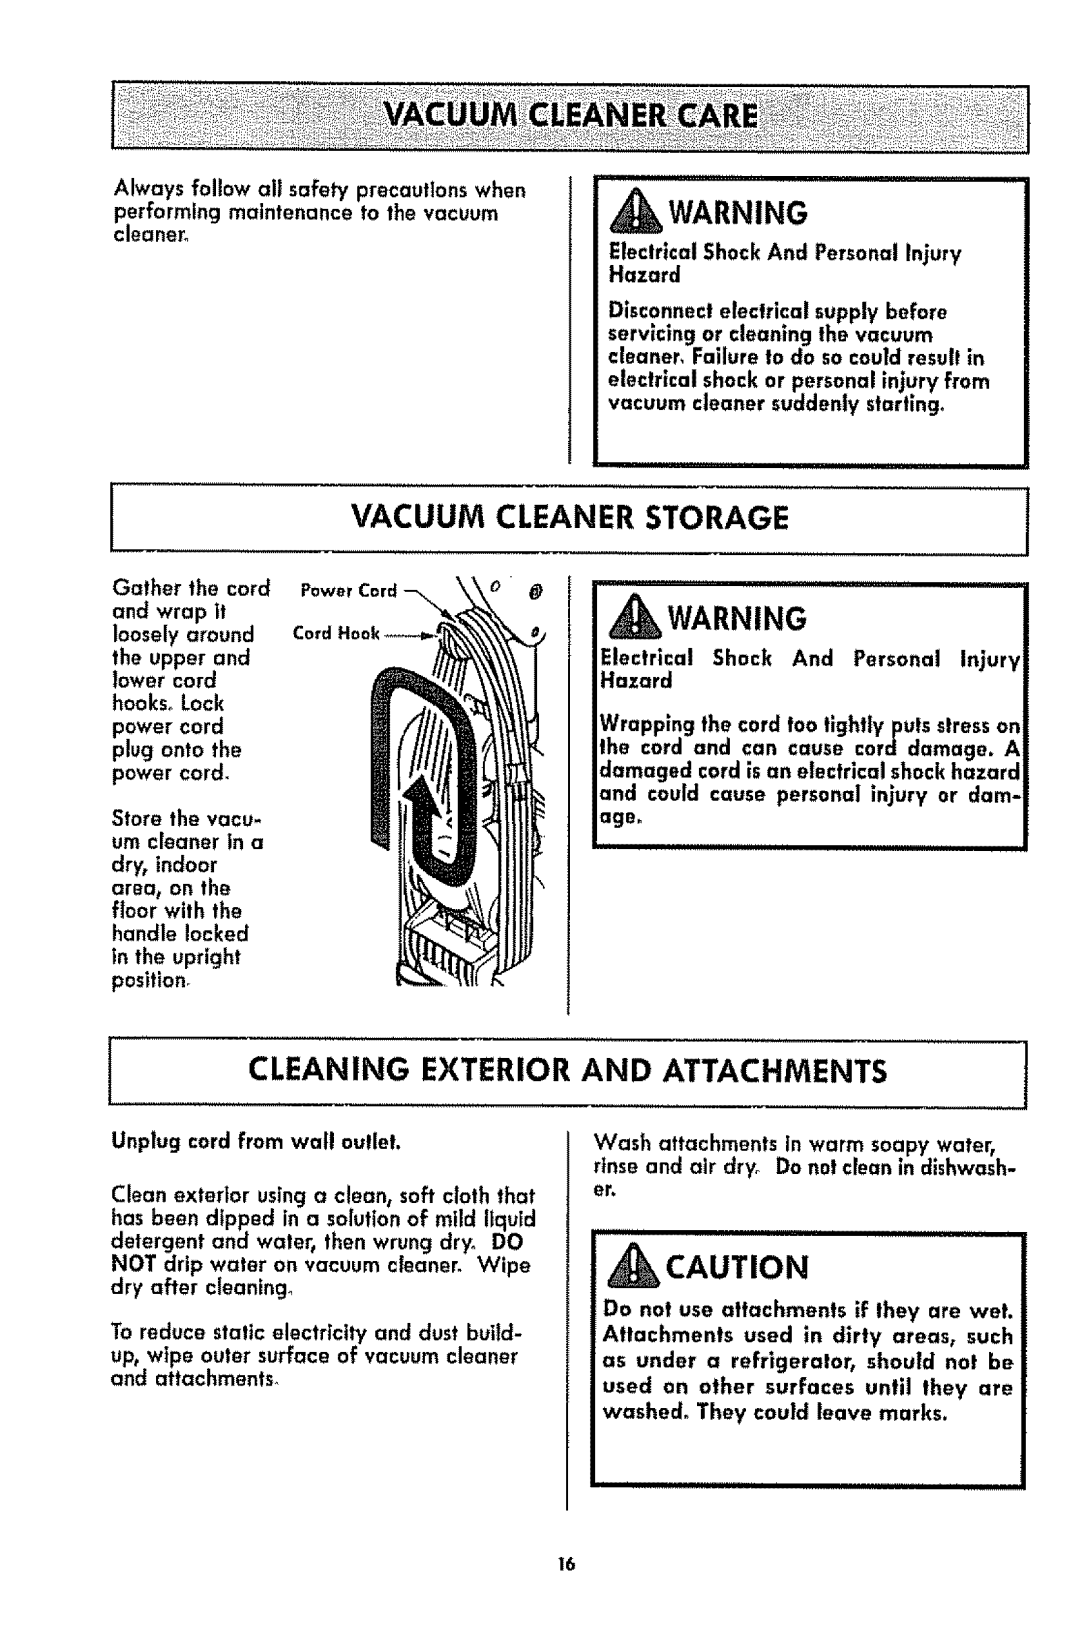 Kenmore 116.3181 manual Vacuum Cleaner Storage, Cleaning Exterior And Attachments, _Warning 